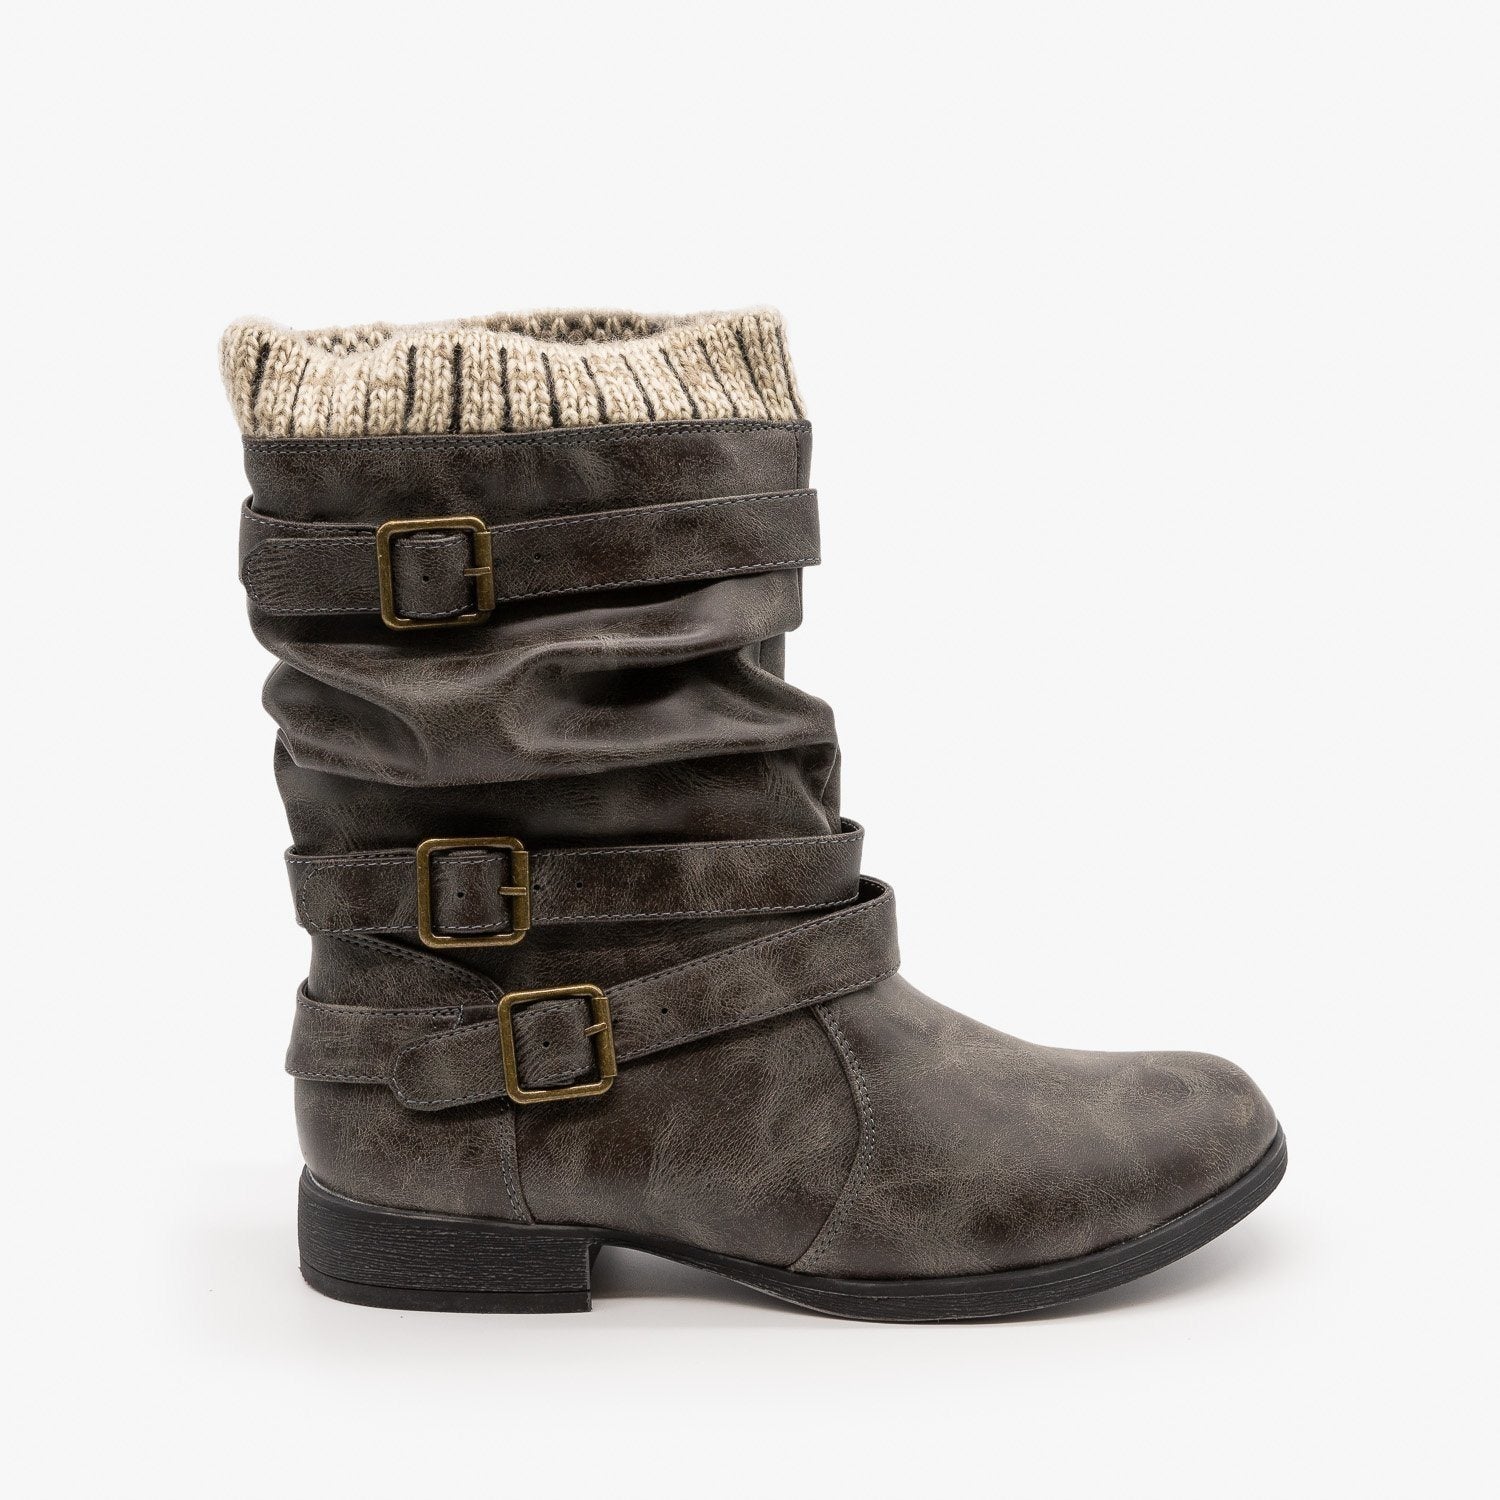 leather booties with buckles